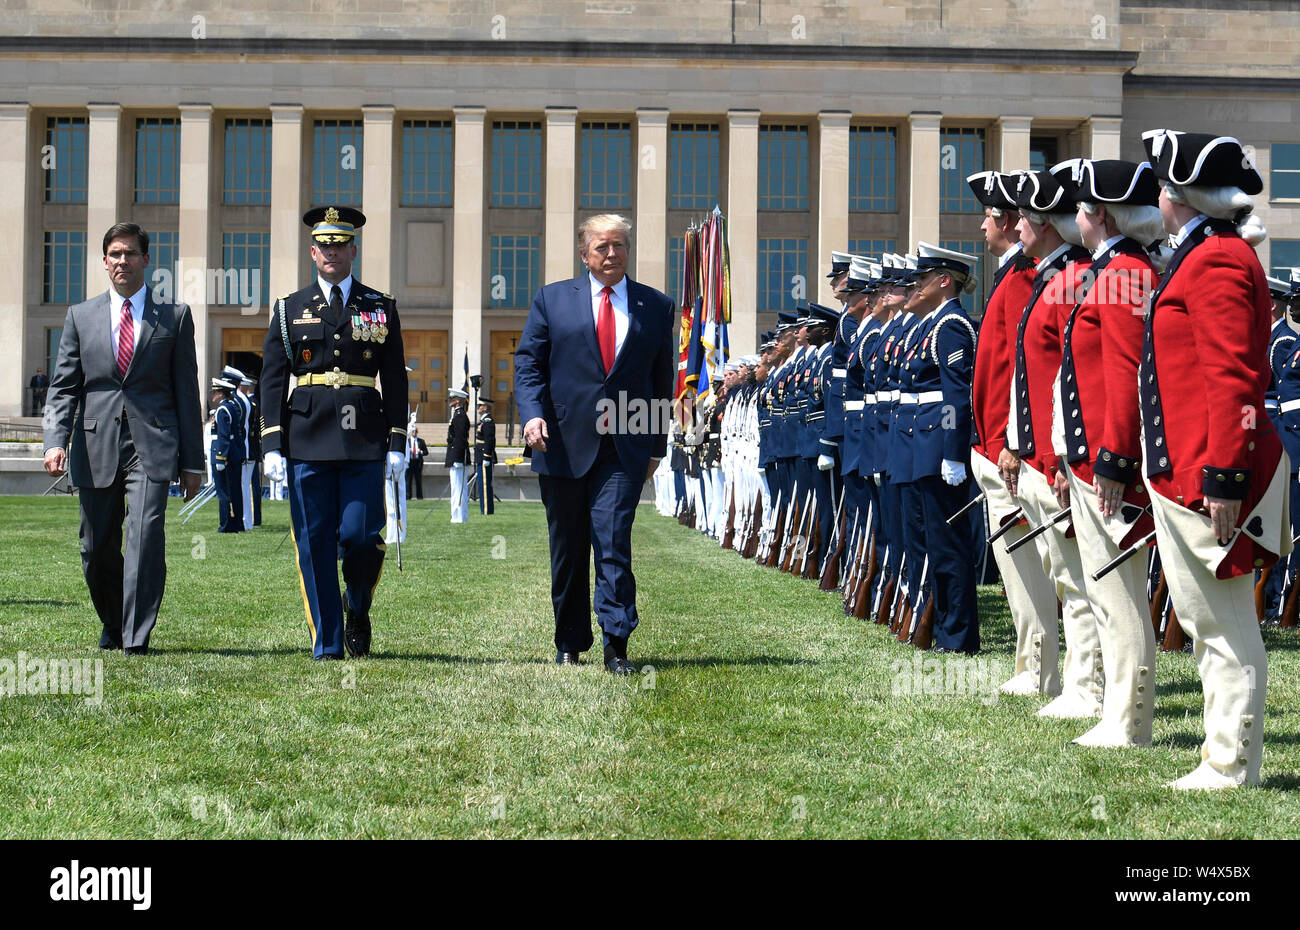 United States President Donald J. Trump (R) reviews troops with the new US Secretary of Defense Dr. Mark T. Esper (L) and US Air Force General Paul J. Selva, Vice Chairman of the Joint Chiefs of Staff, at the Pentagon, Thursday, July 25, 2019, Washington, DC. The Department of Defense has been without a full-time leader since former Secretary Jim Mattis resigned in December 2018. Credit: Mike Theiler/Pool via CNP /MediaPunch Stock Photo